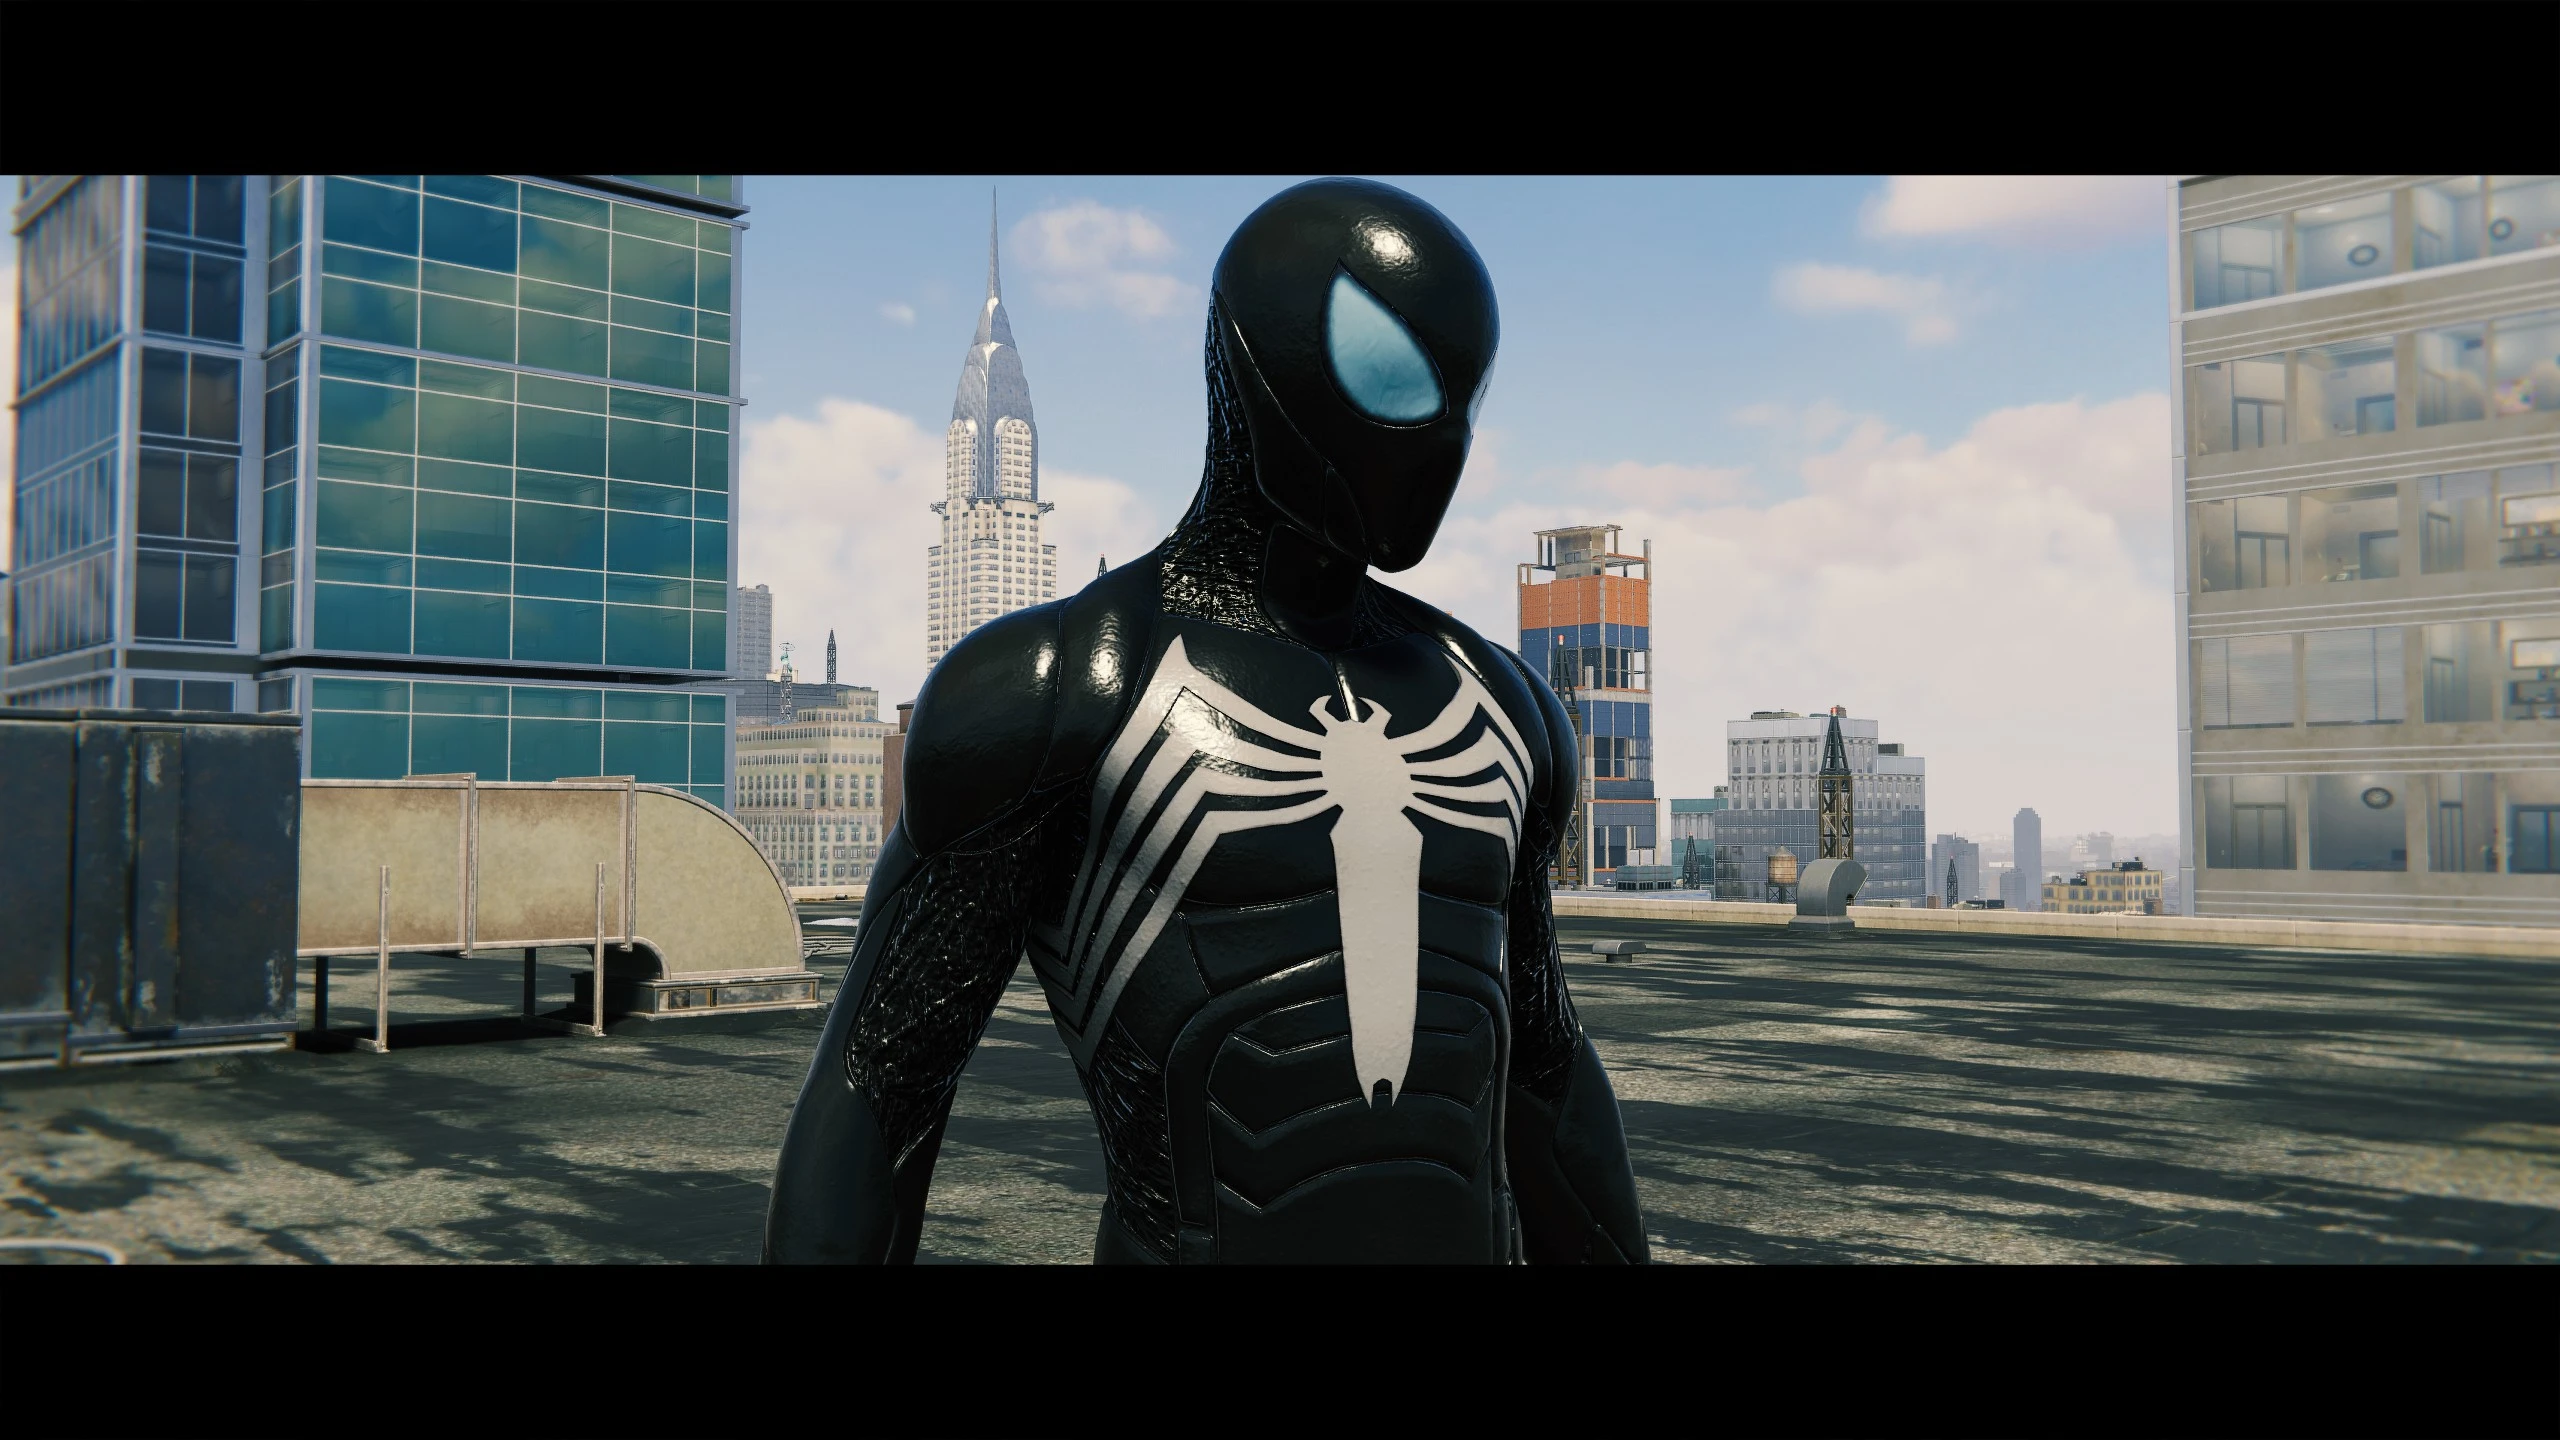 Agrofro's Spiderman 2 symbiote at Marvel's Spider-Man Remastered Nexus -  Mods and community